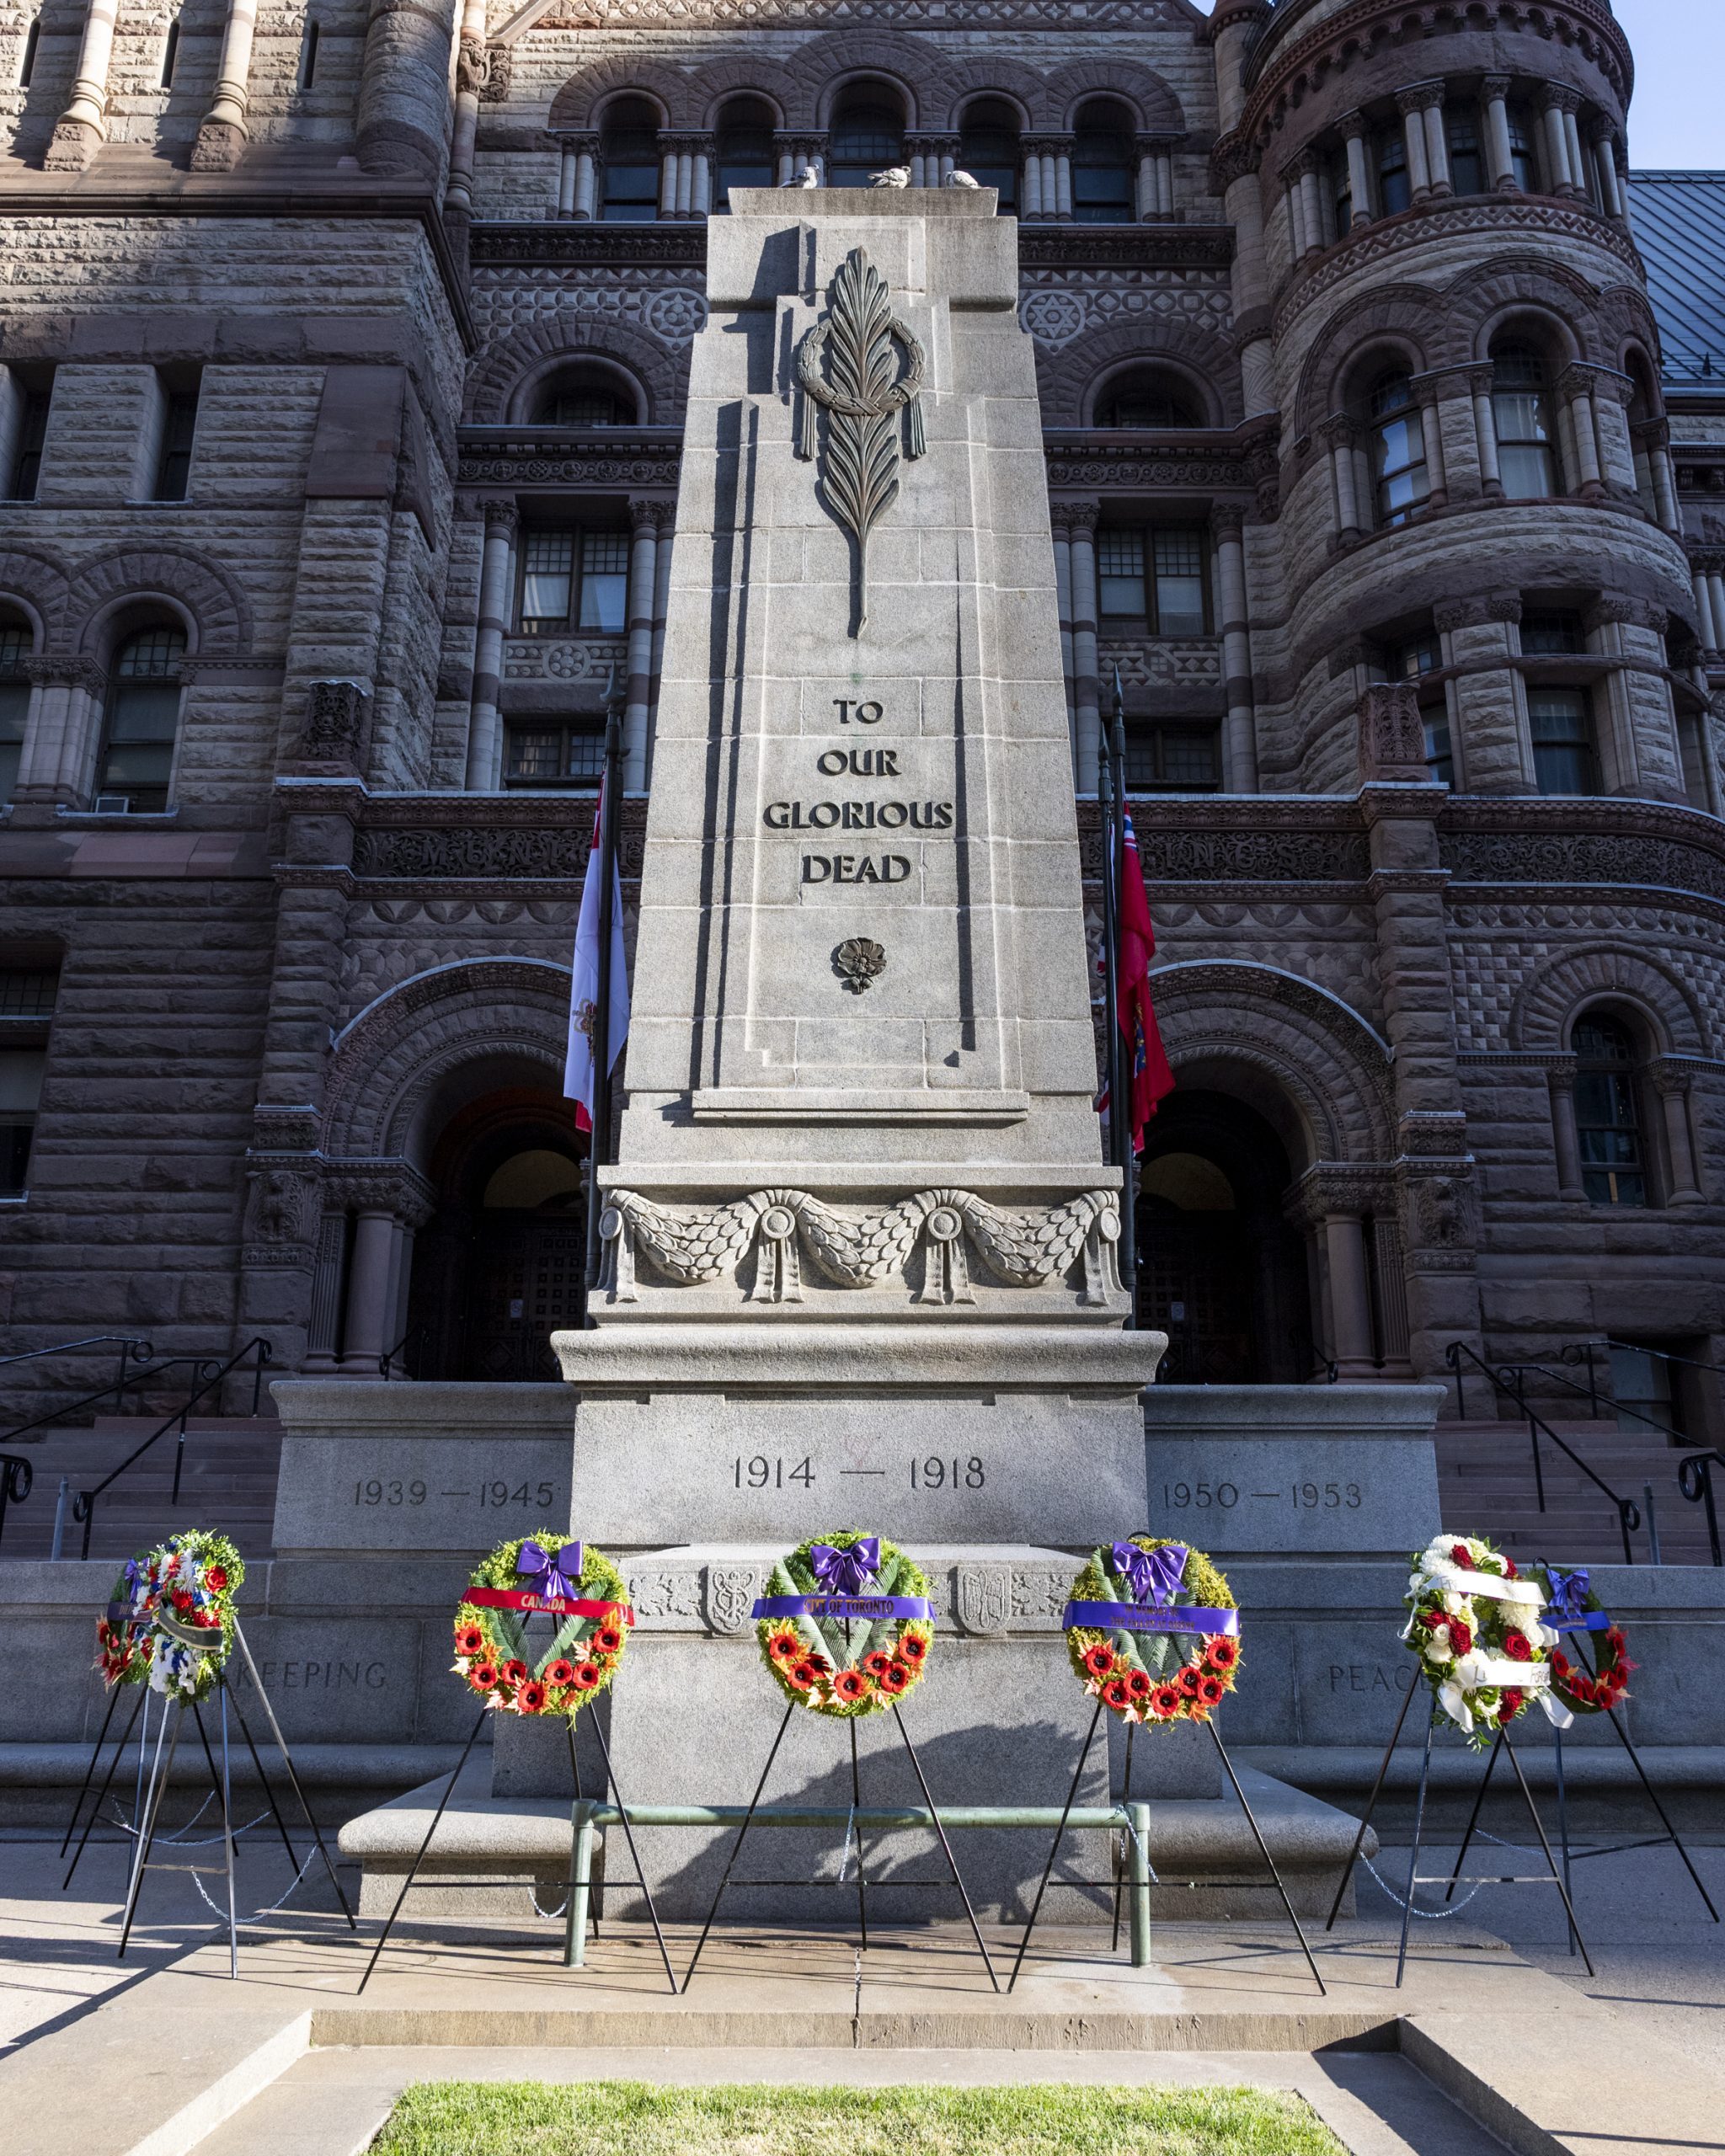 A photo of the Old City Hall Cenotaph with 8 wreaths on stands in front of the cenotaph.